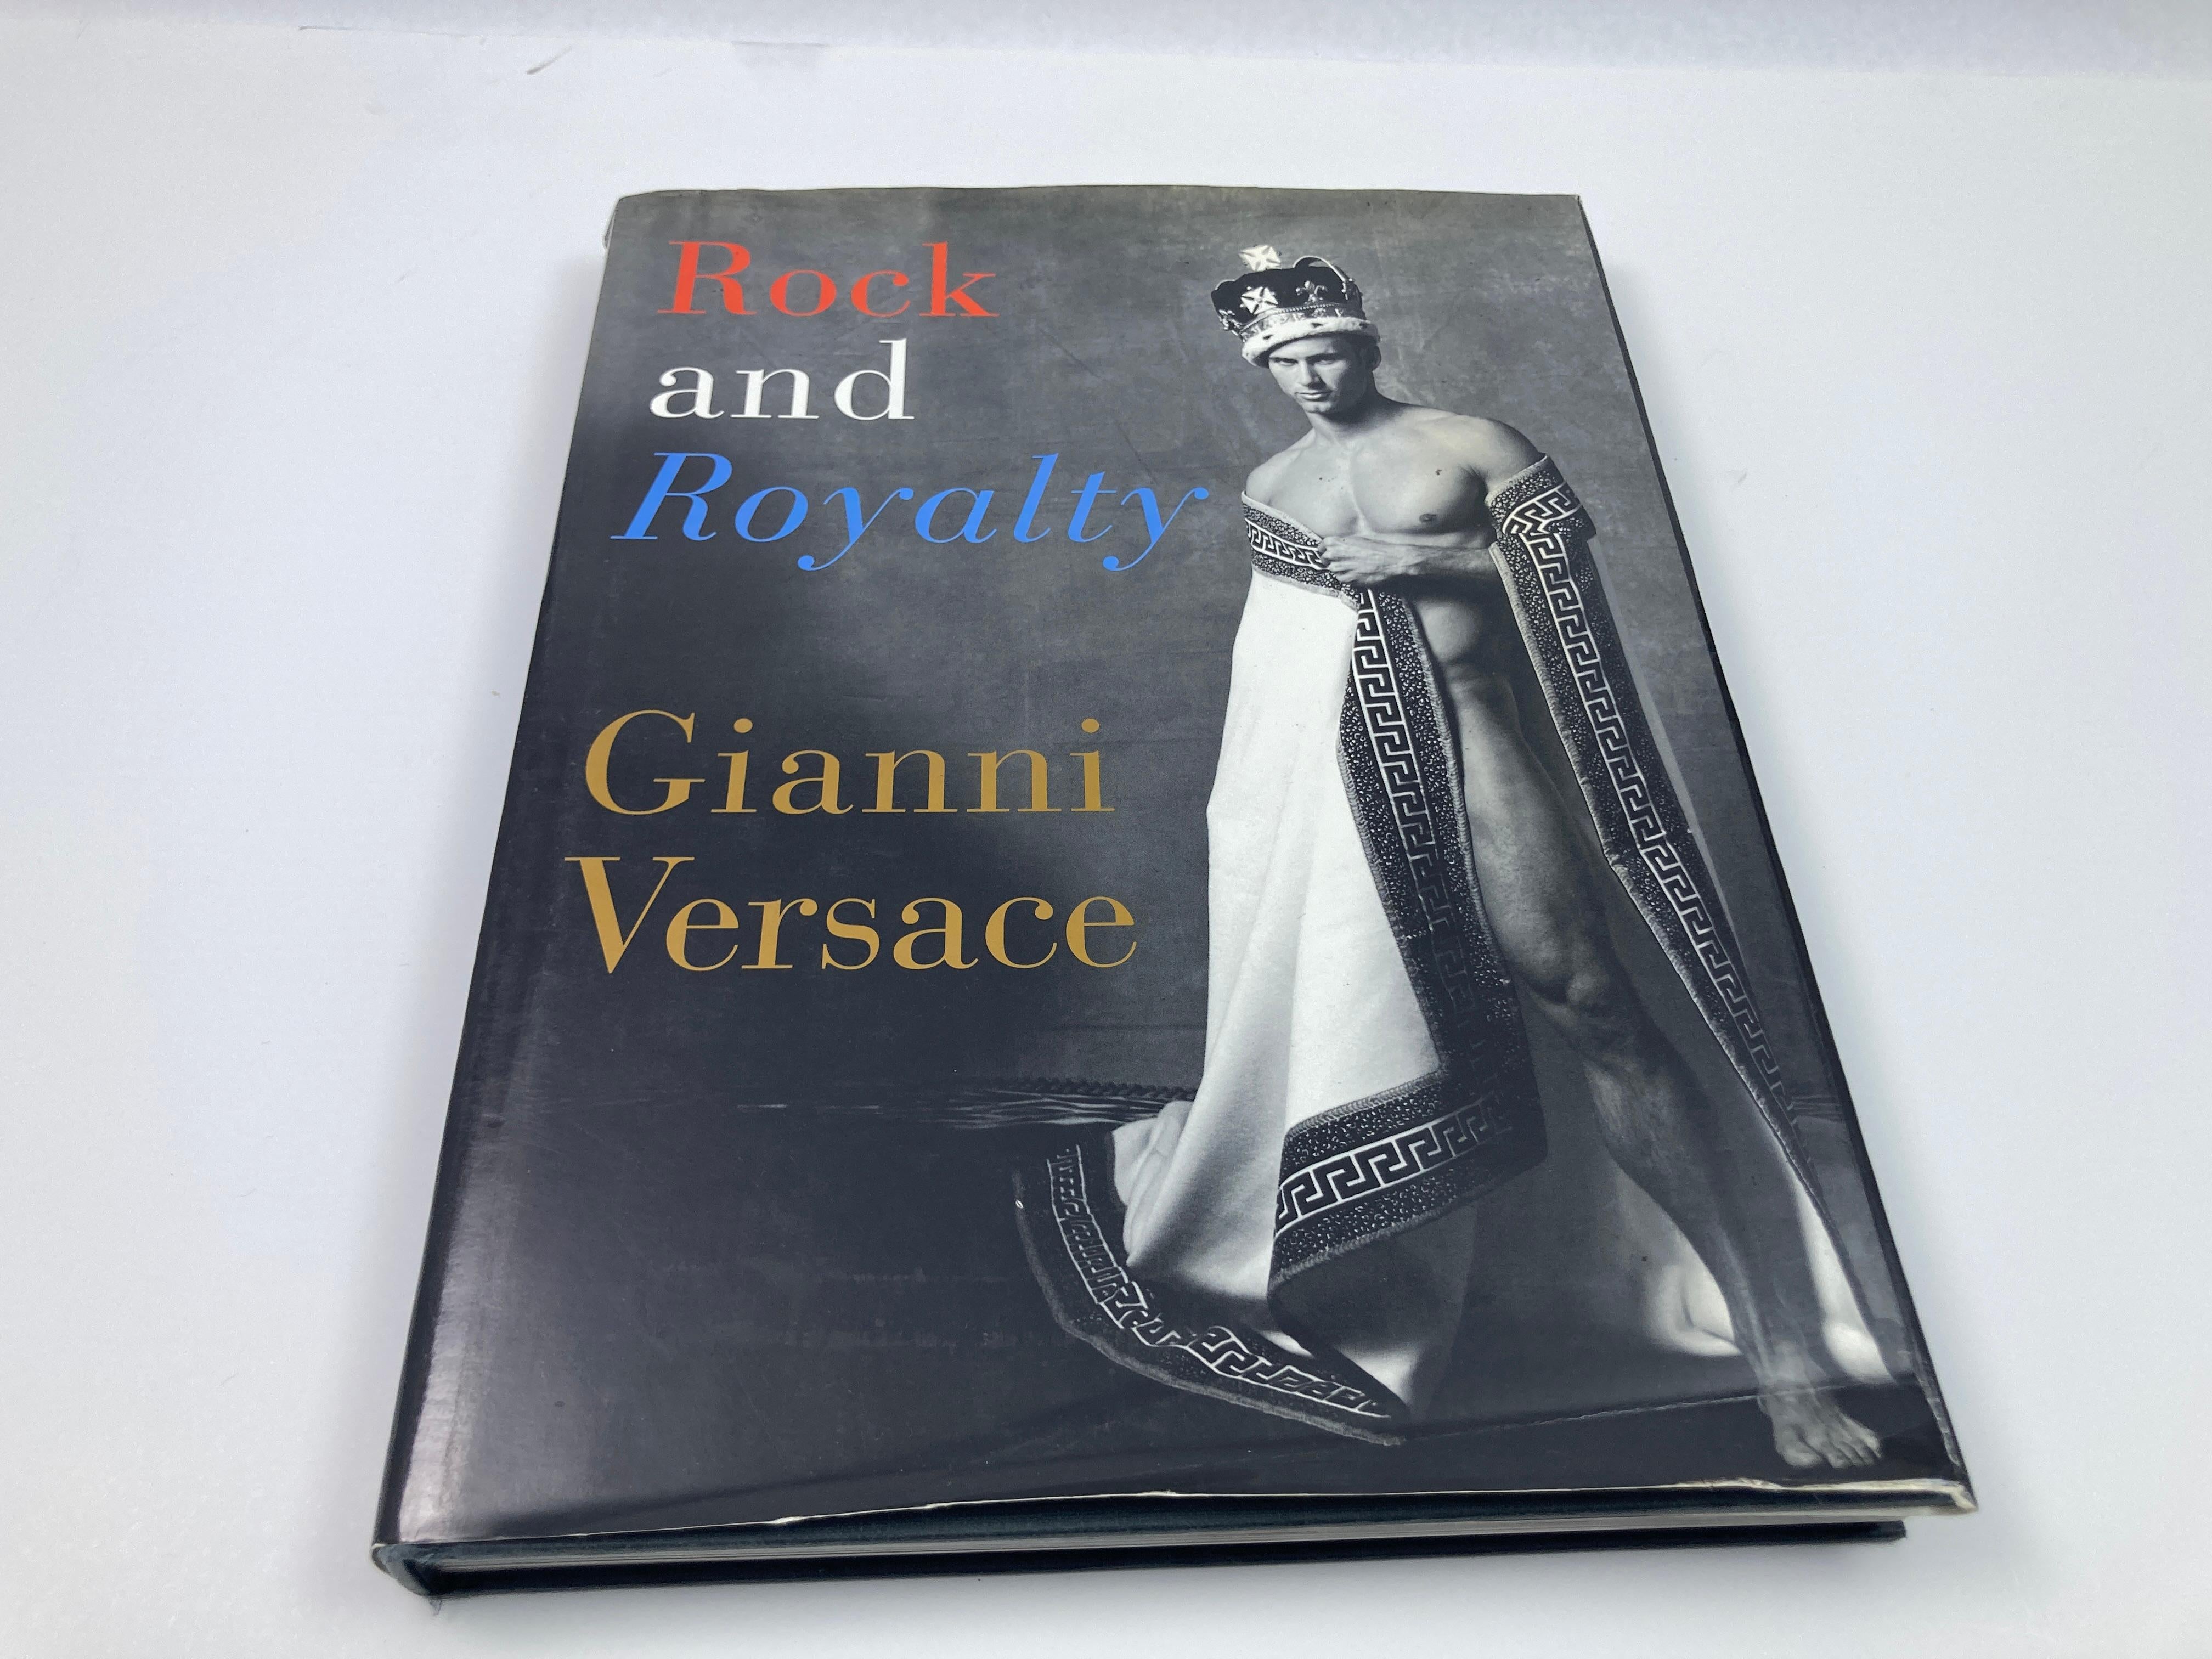 Black Rock and Royalty Gianni Versace Hardcover Table Book 1st Ed. Large Format For Sale